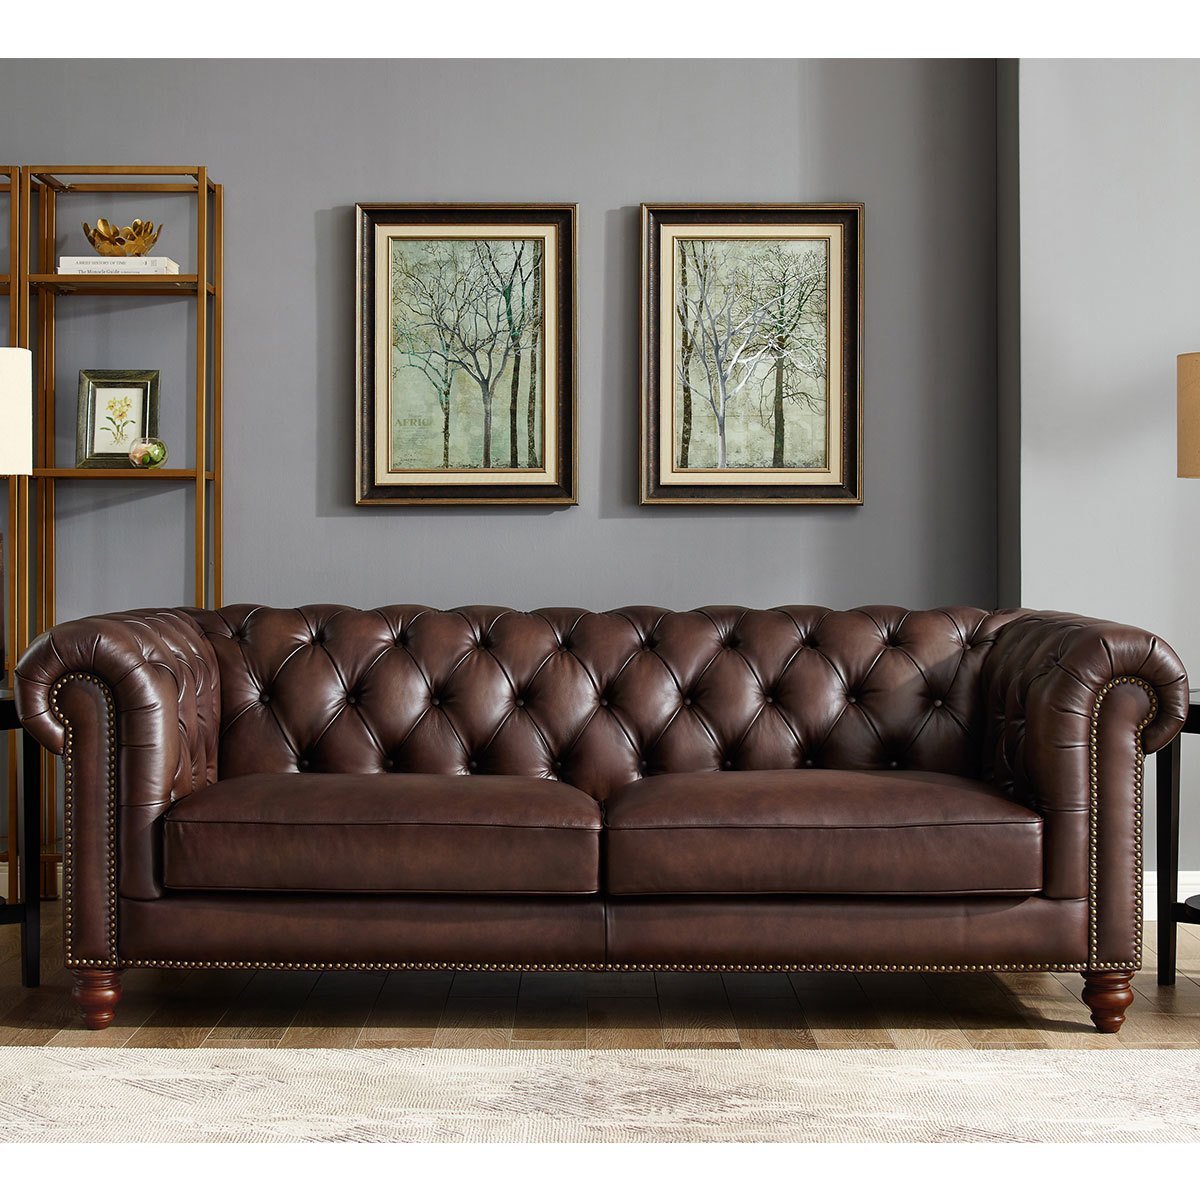 Allington 3 Seater Brown Leather Chesterfield Sofa - Signature Retail Stores